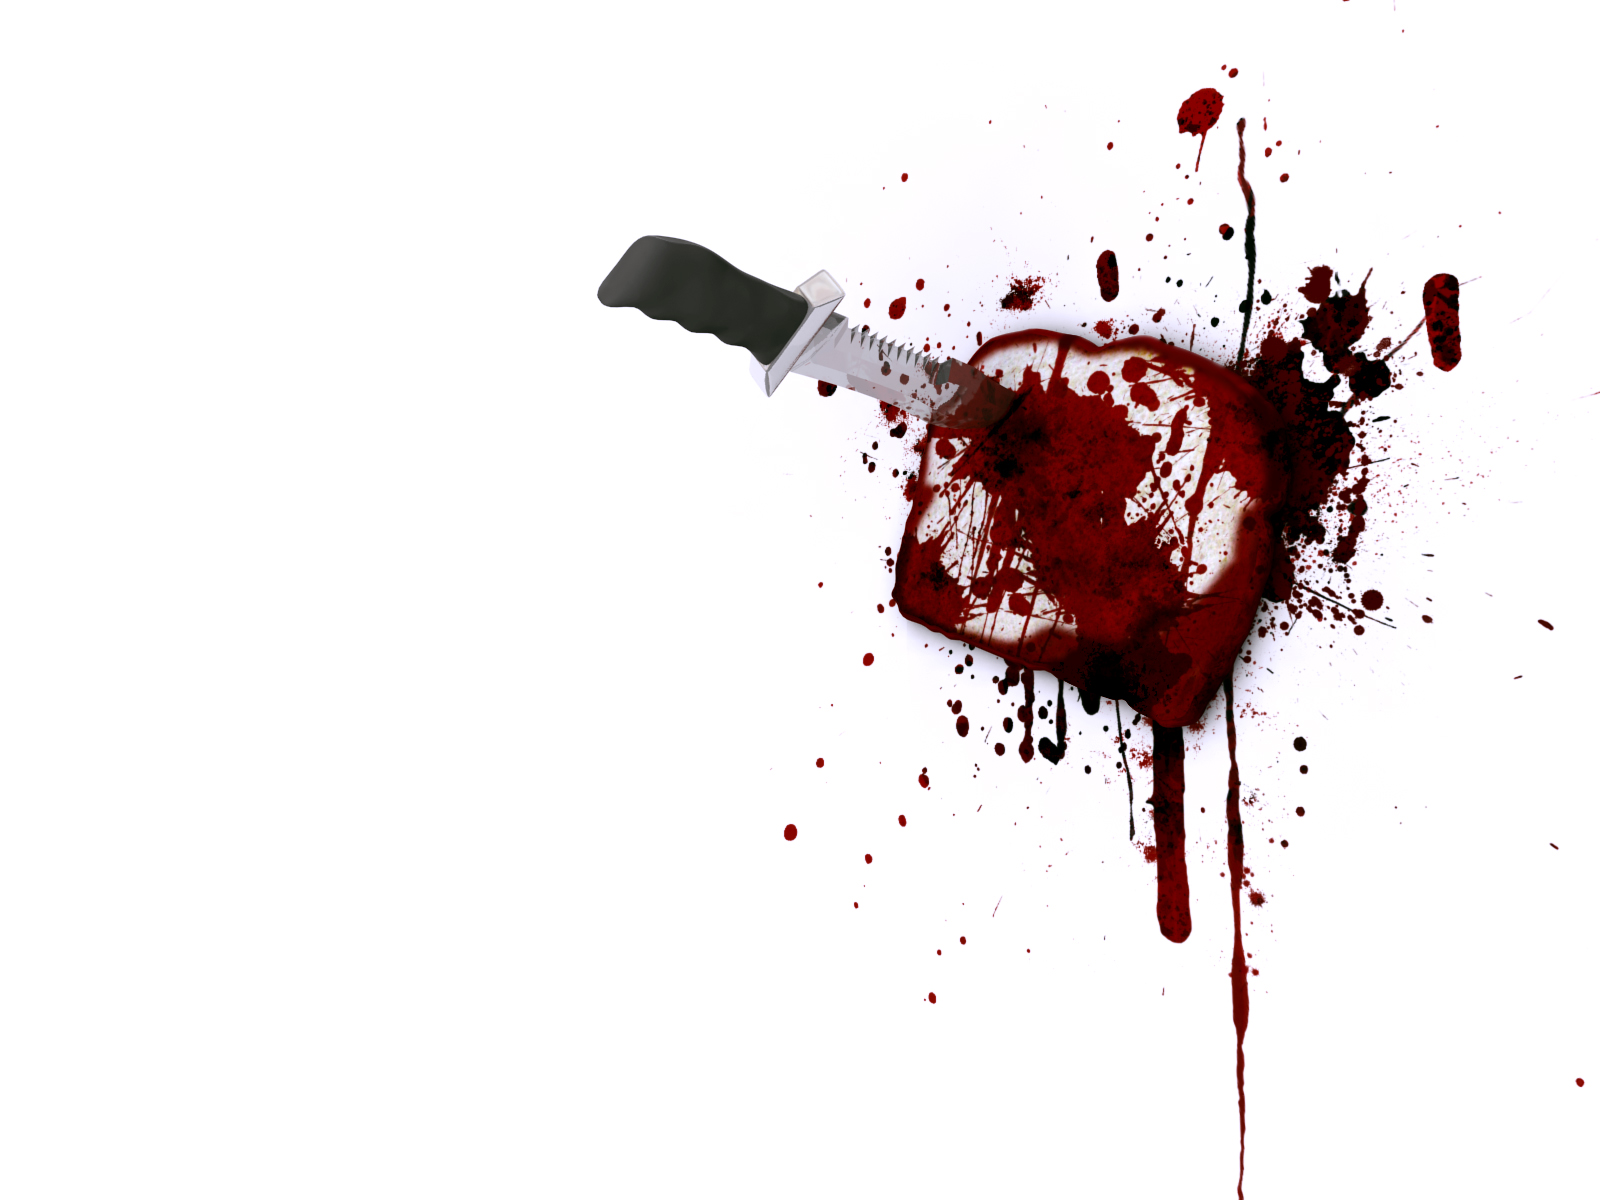 Knife And Blood Wallpaper Image Pictures Photos